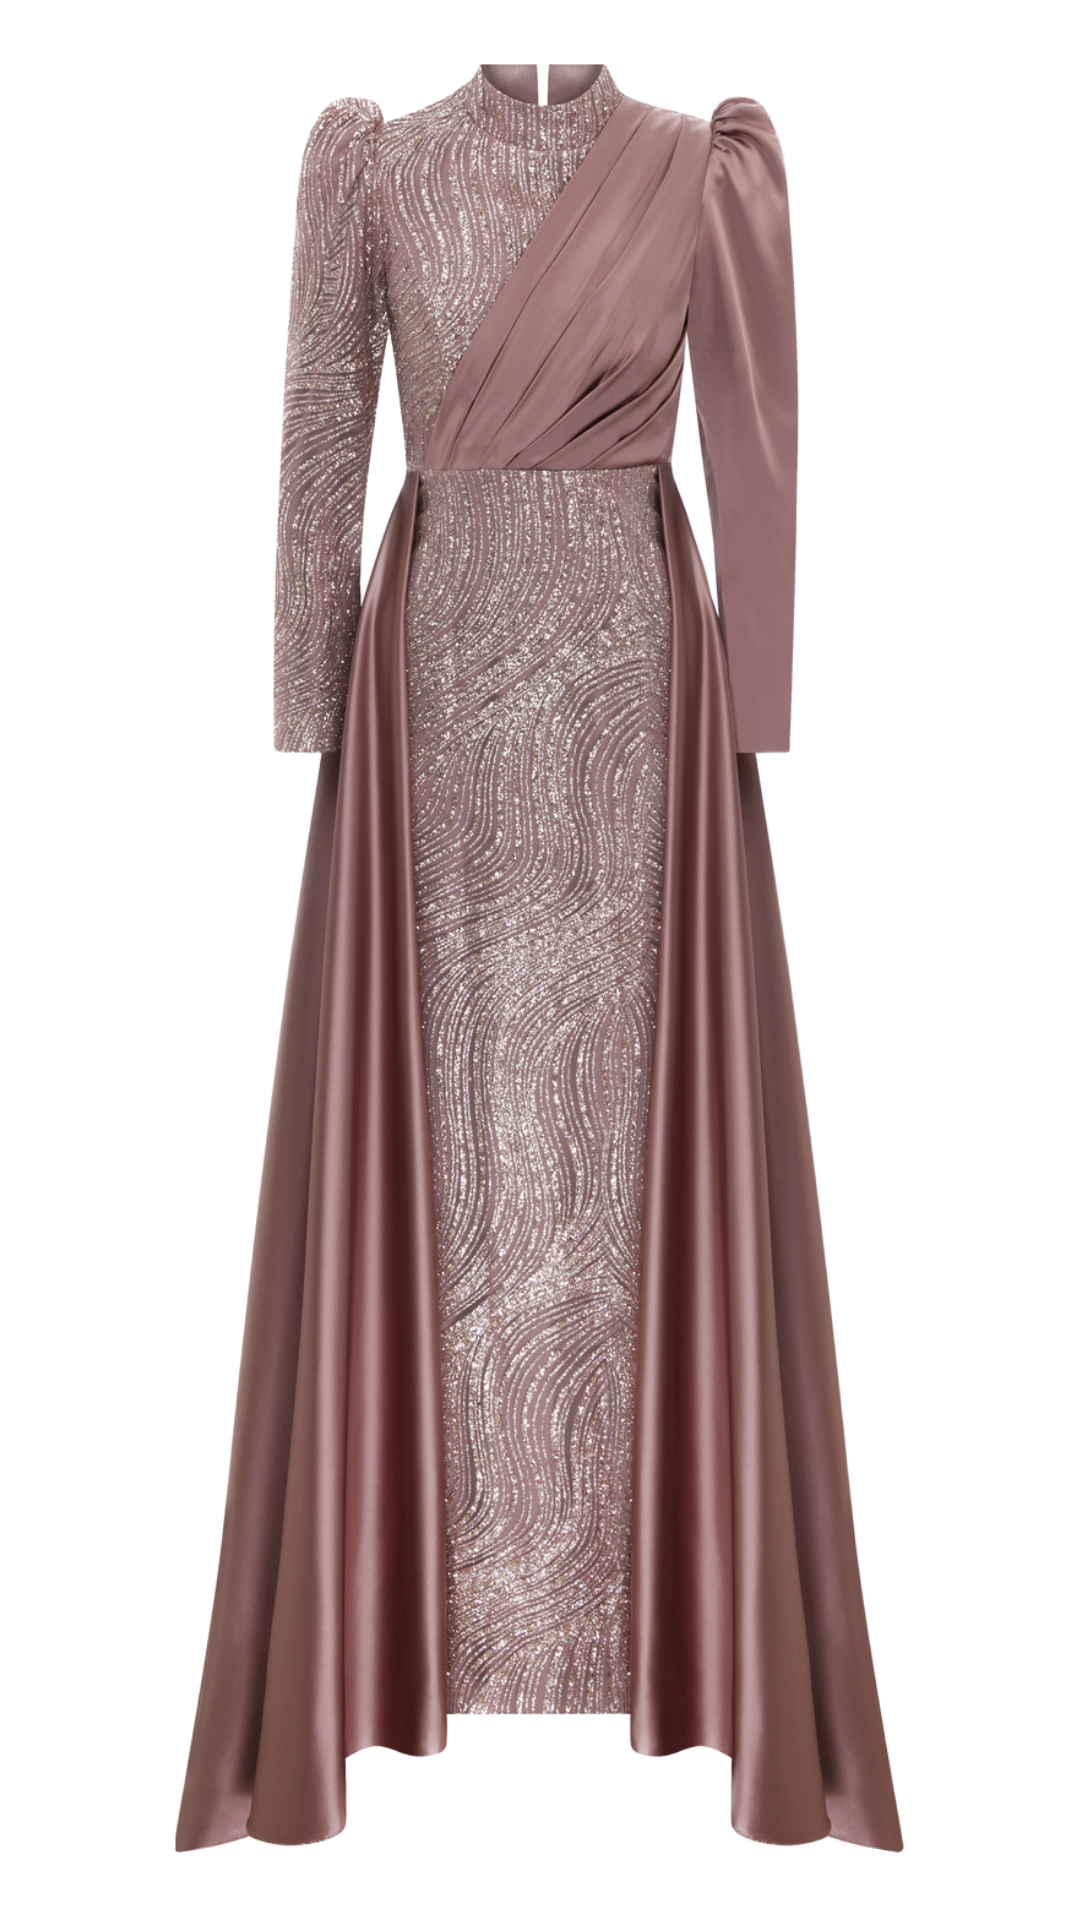 Gilded Rose: Modest Rose Glitter Dress with Draped Upper Front and Tail Detail